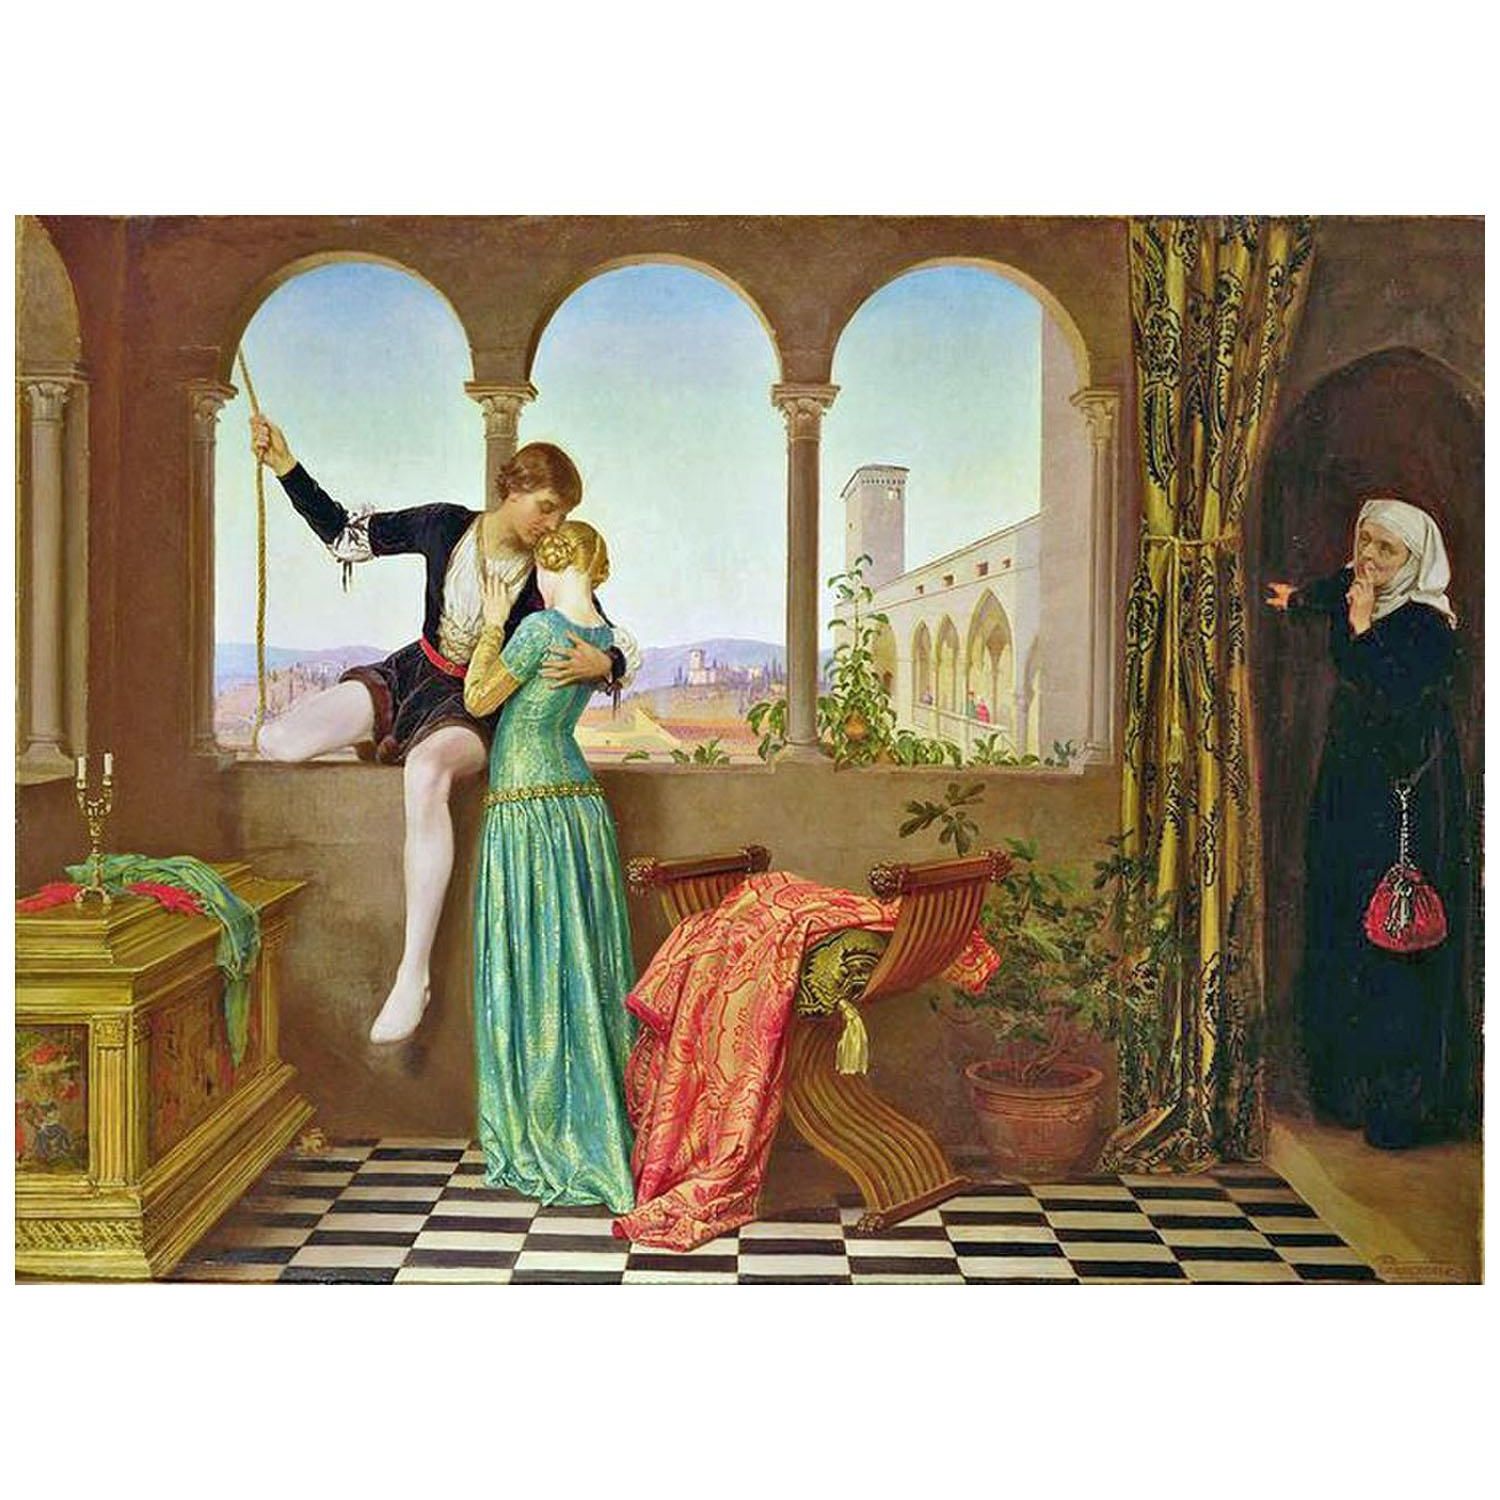 Eleanor Fortescue-Brickdale. Romeo and Juliet Farewell. 1905